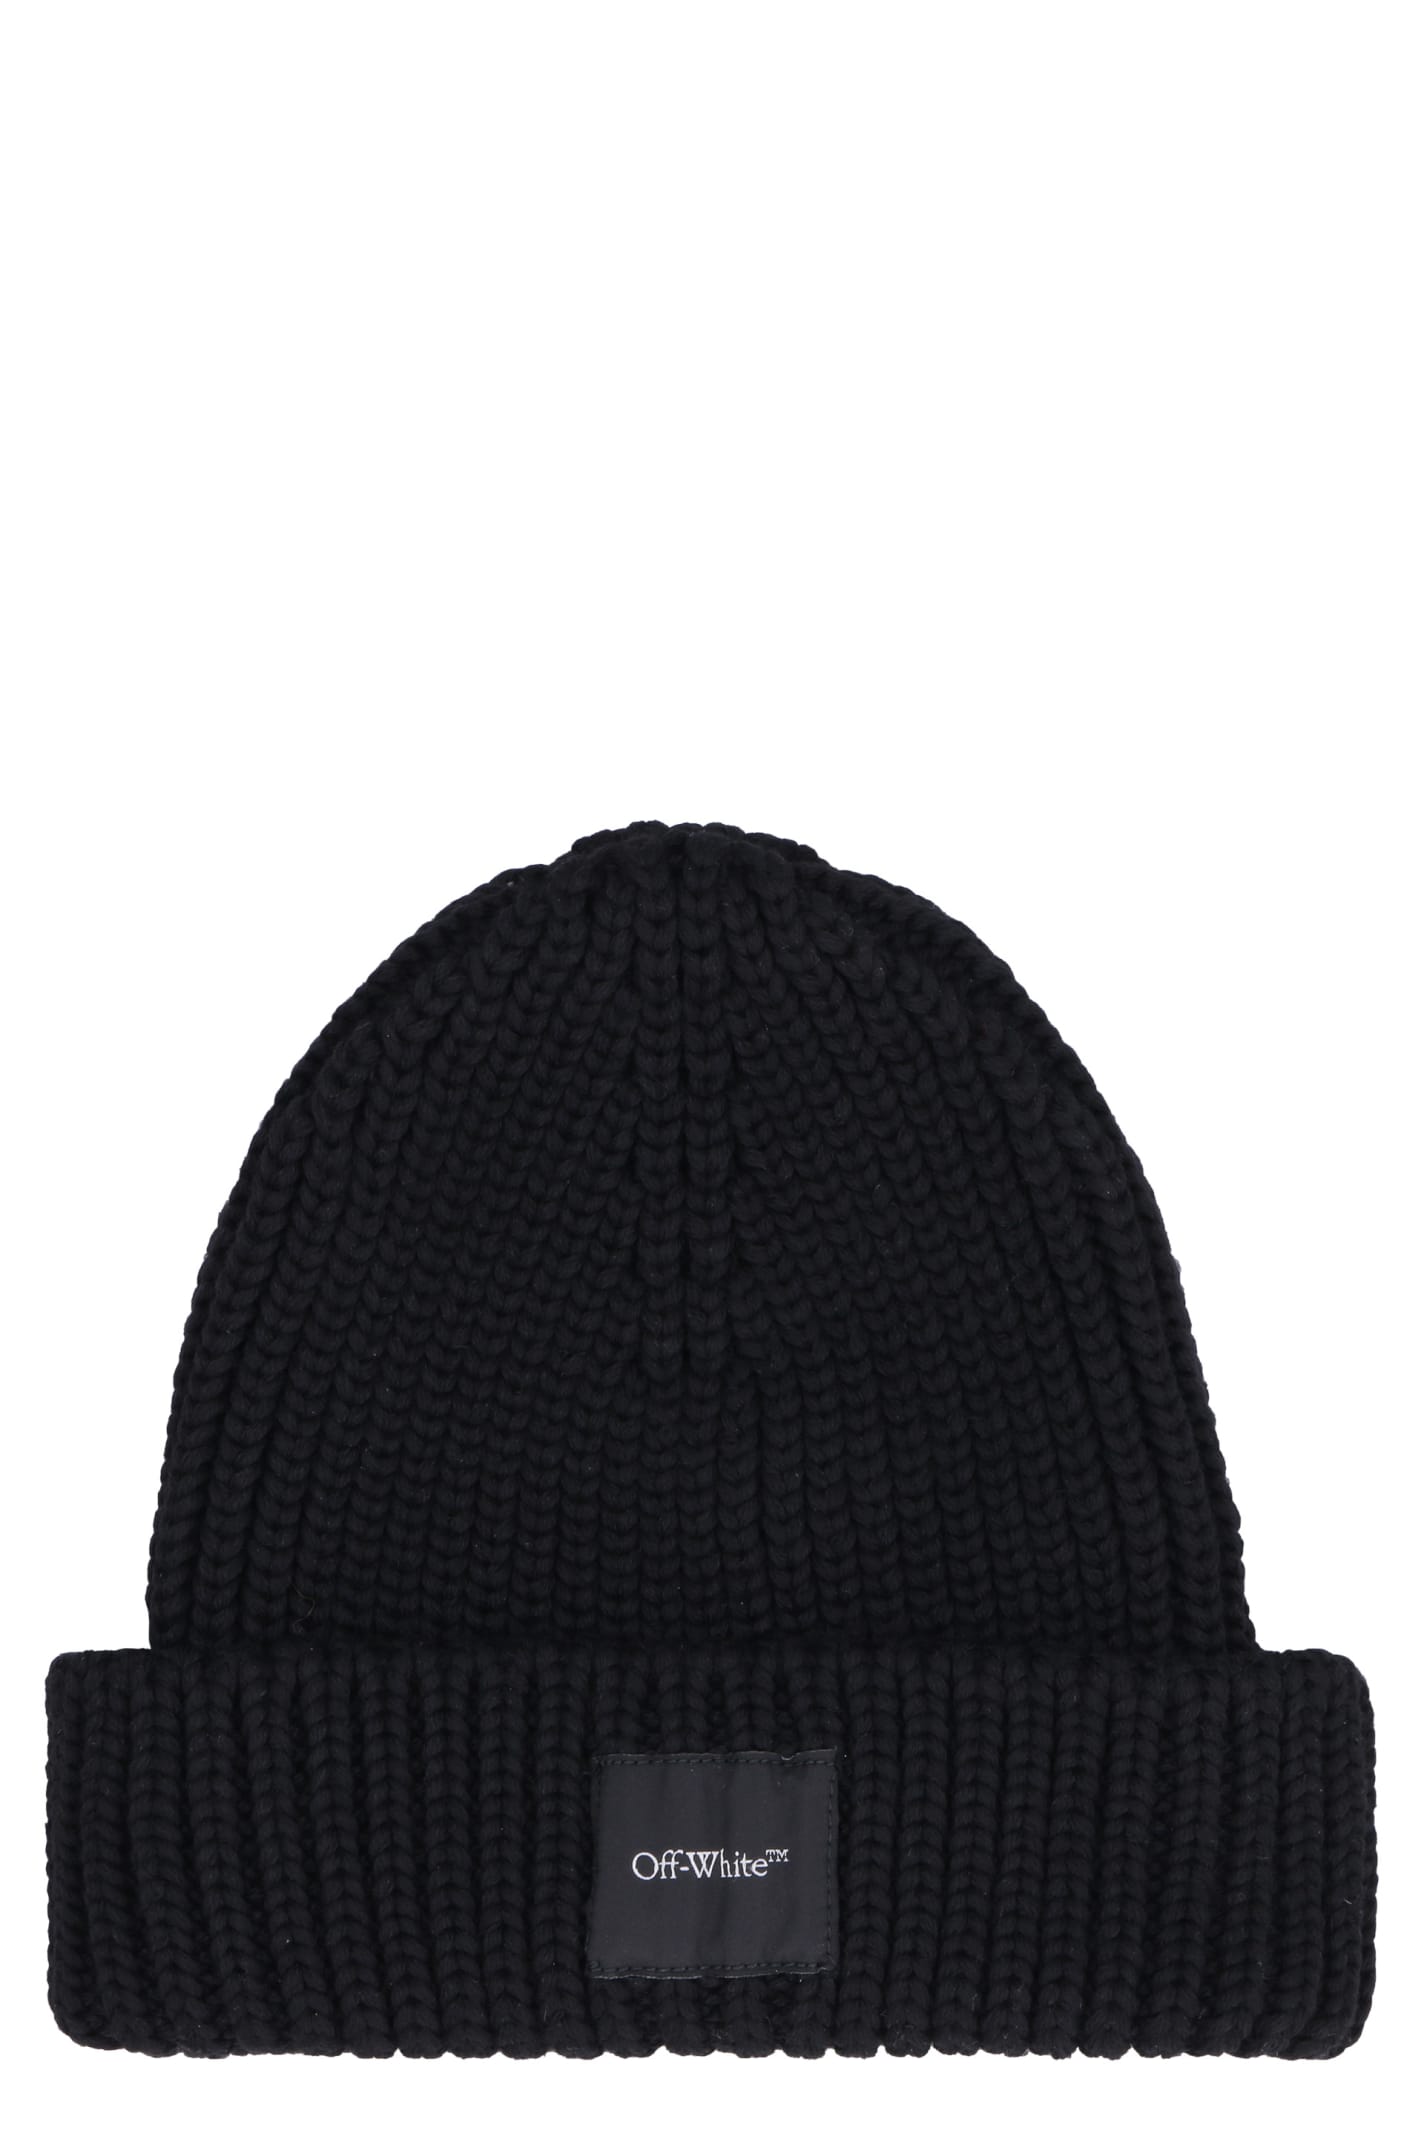 Off-white Ribbed Knit Beanie In Black